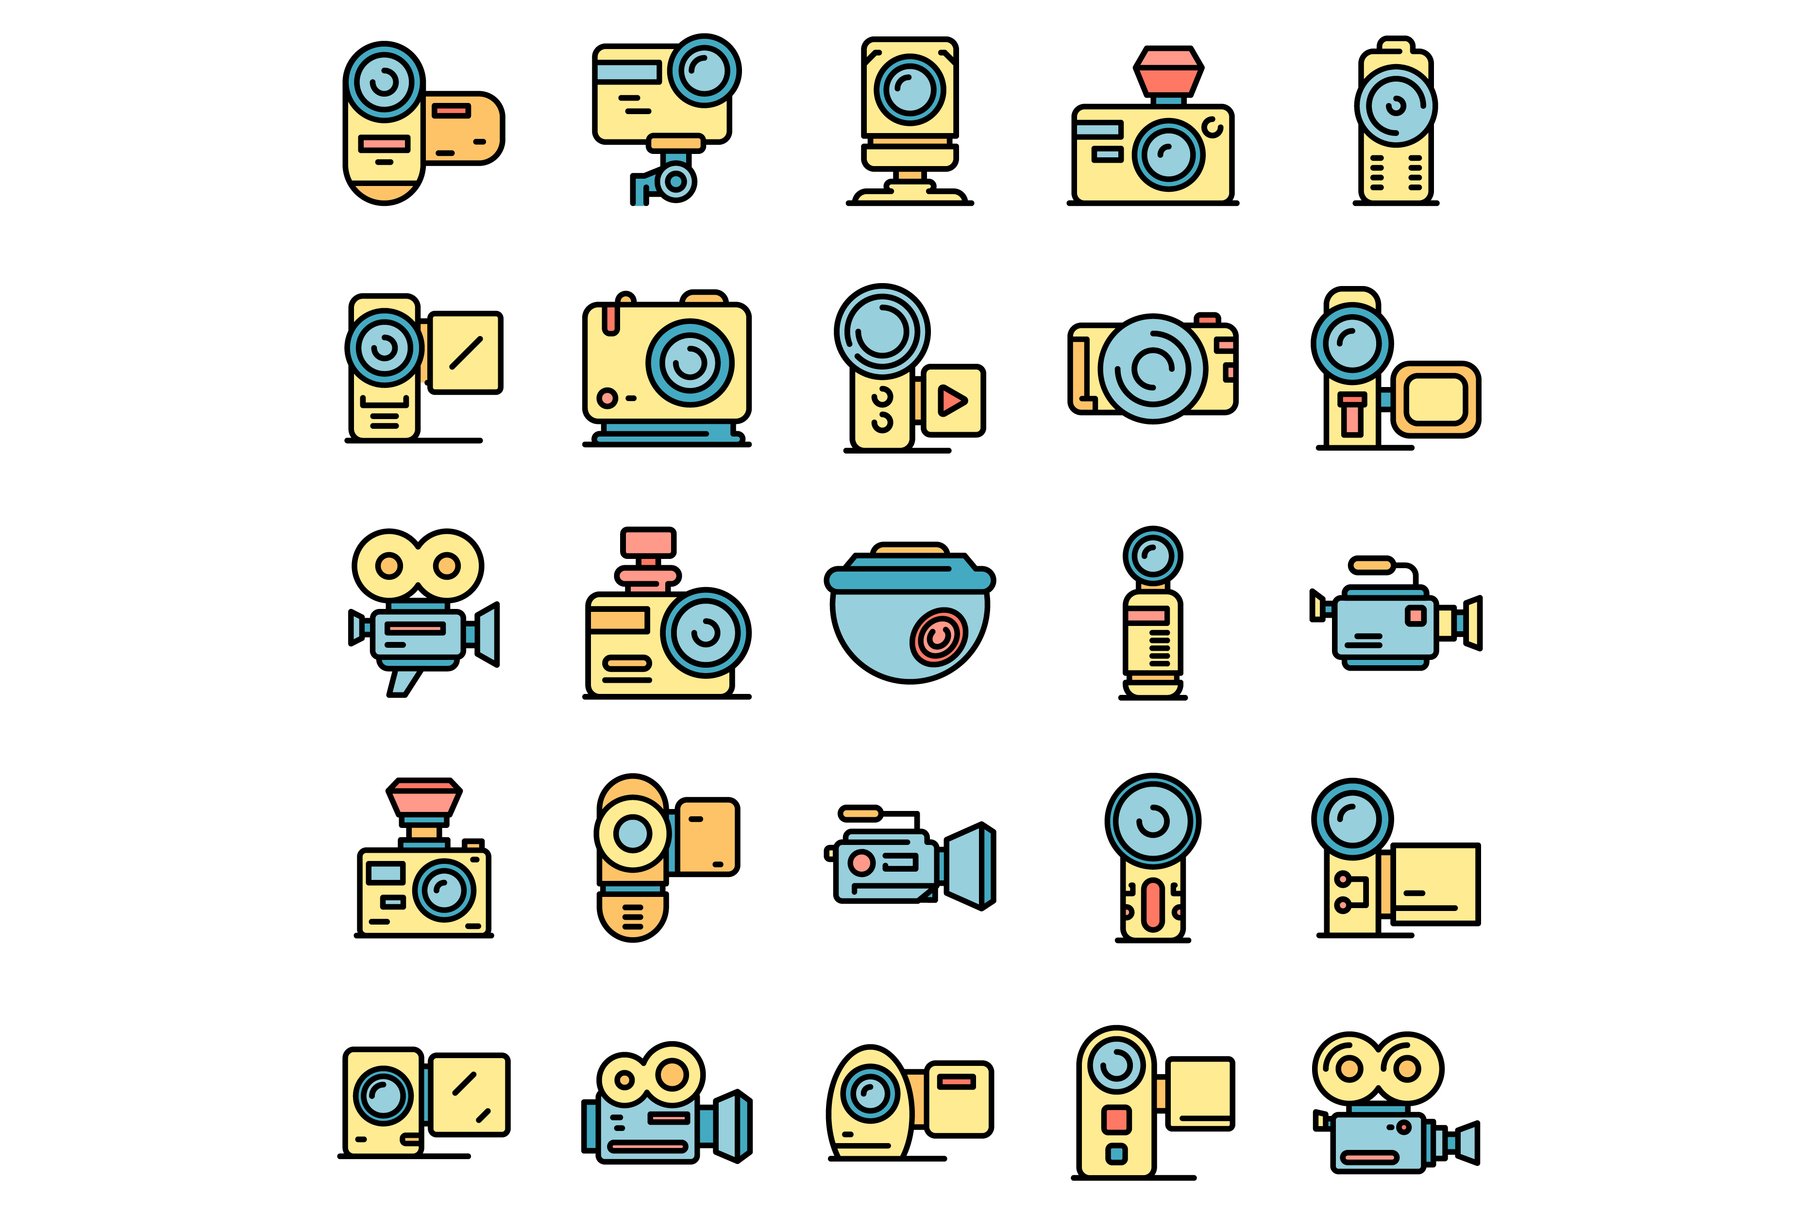 Camcorder icons set vector flat cover image.